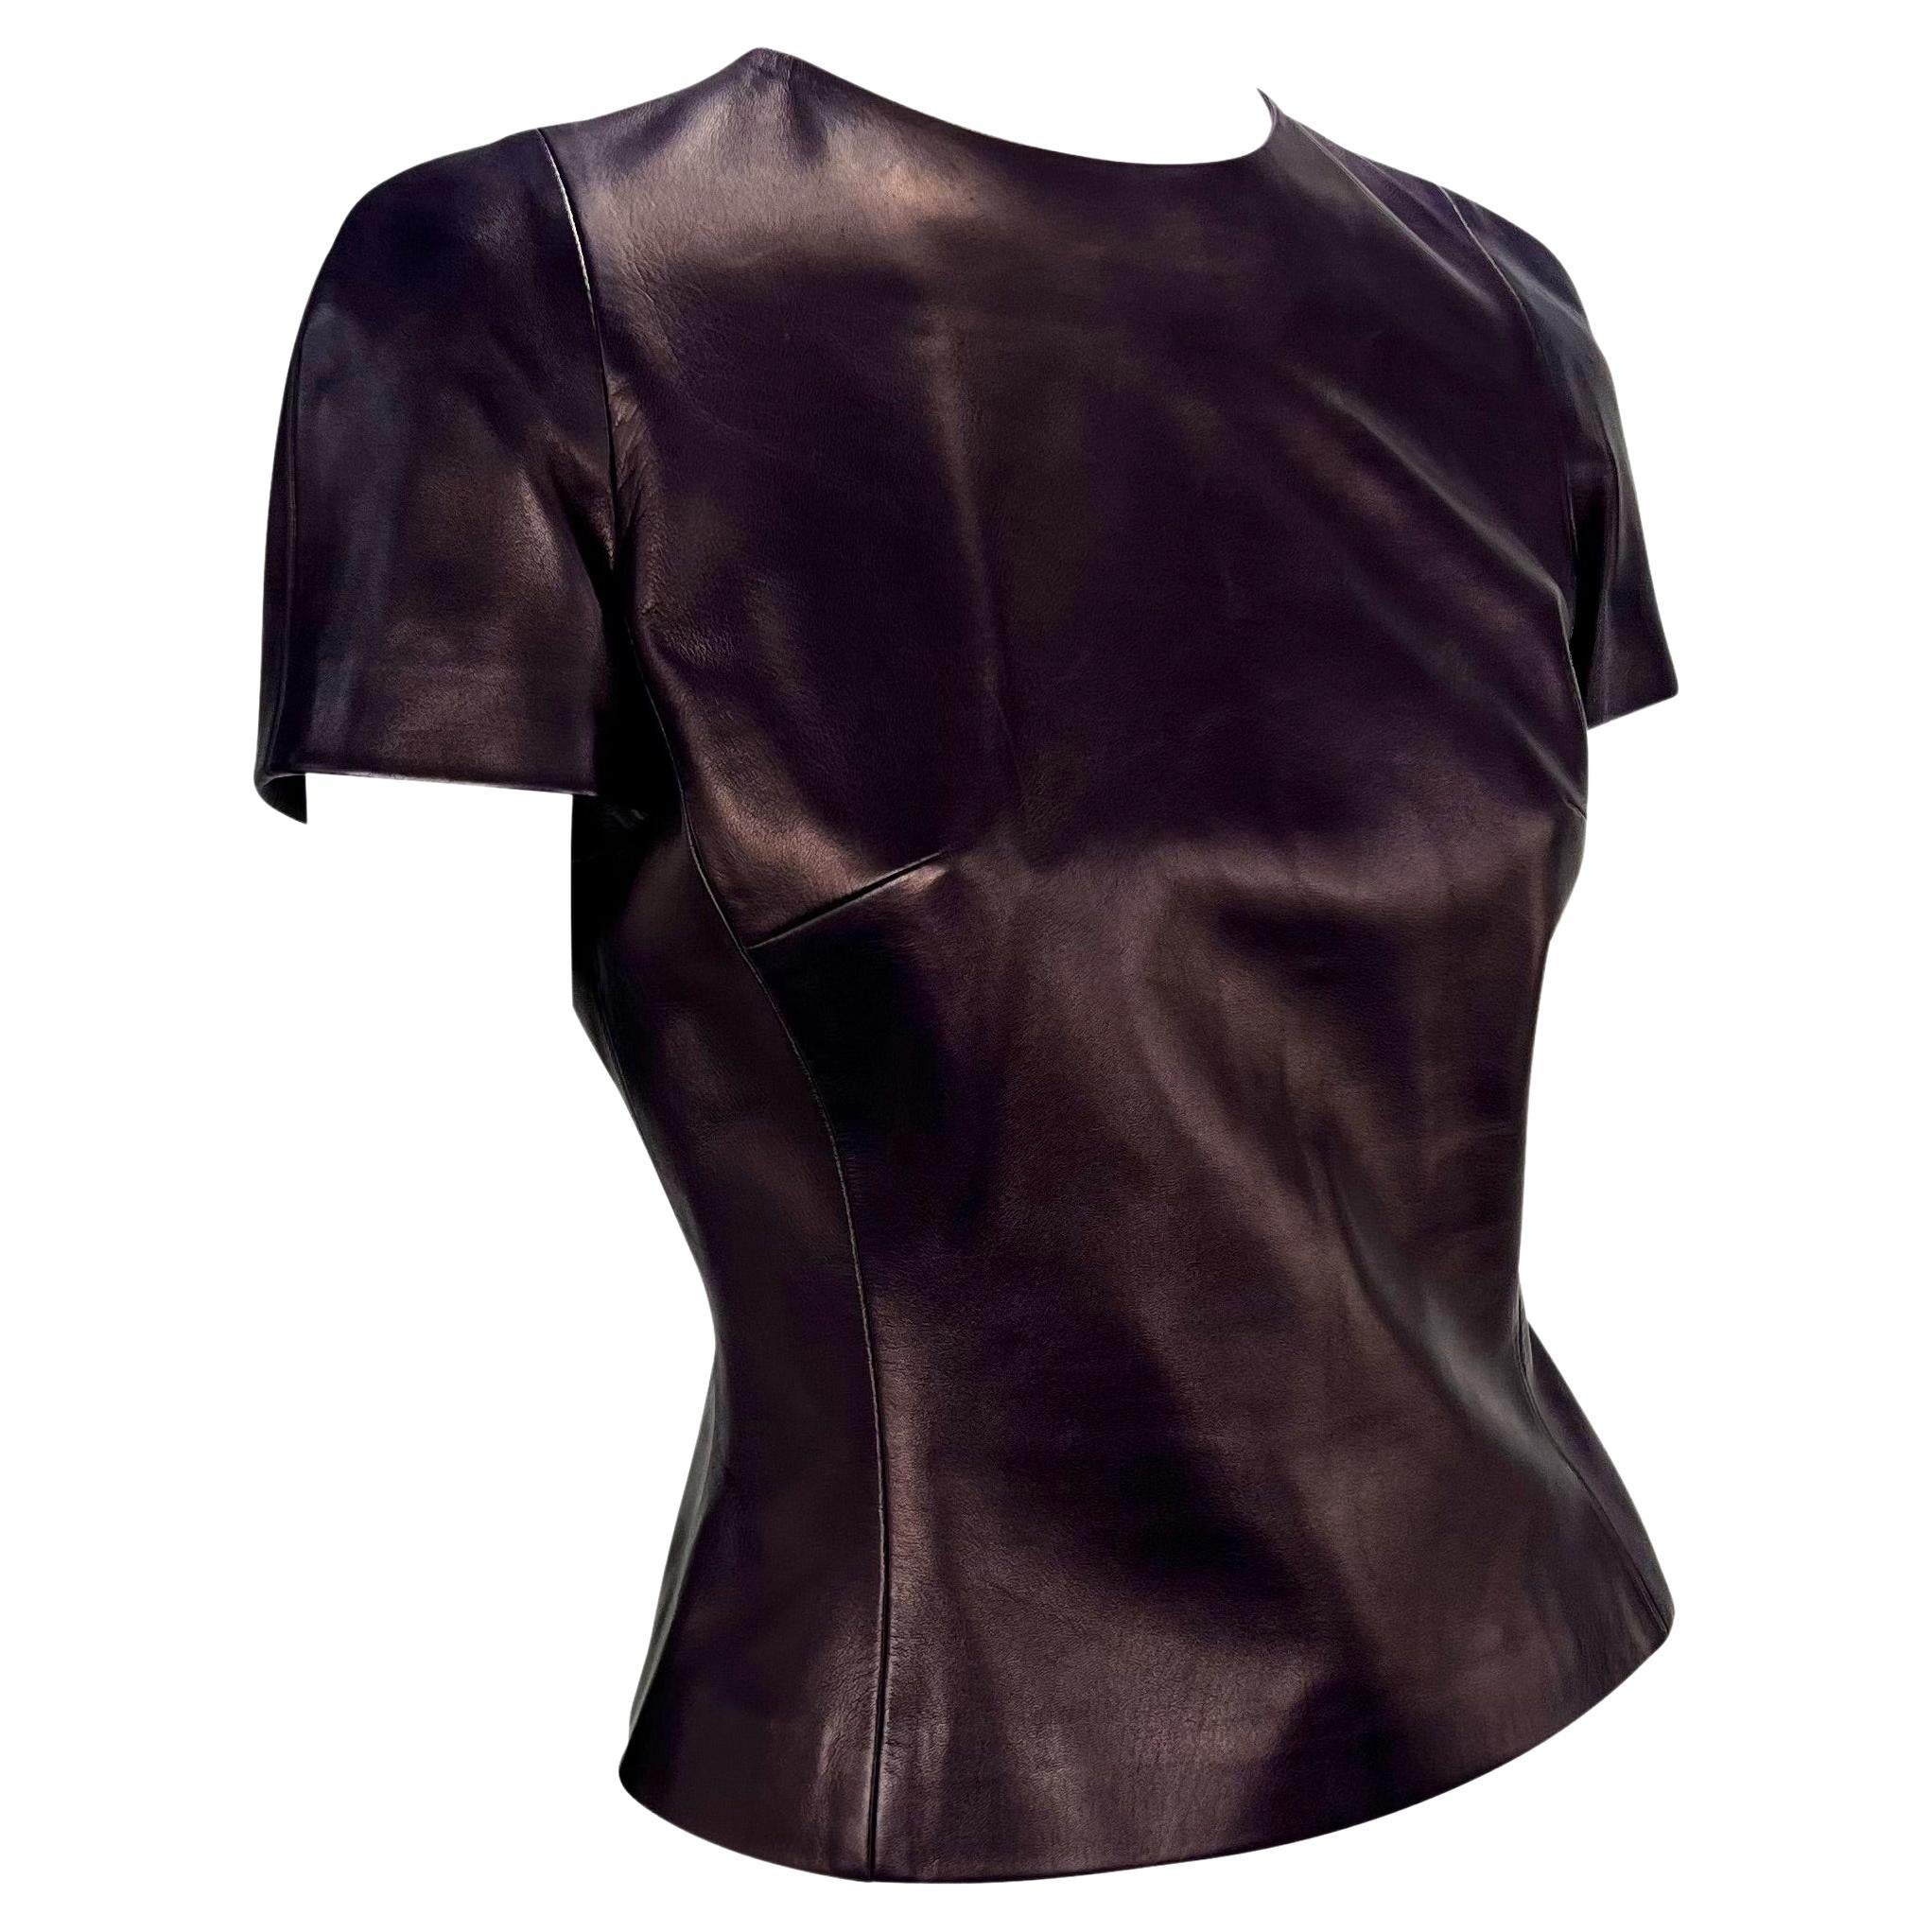 Black F/W 1995 Gucci by Tom Ford Purple Leather Zip Cropped Top For Sale